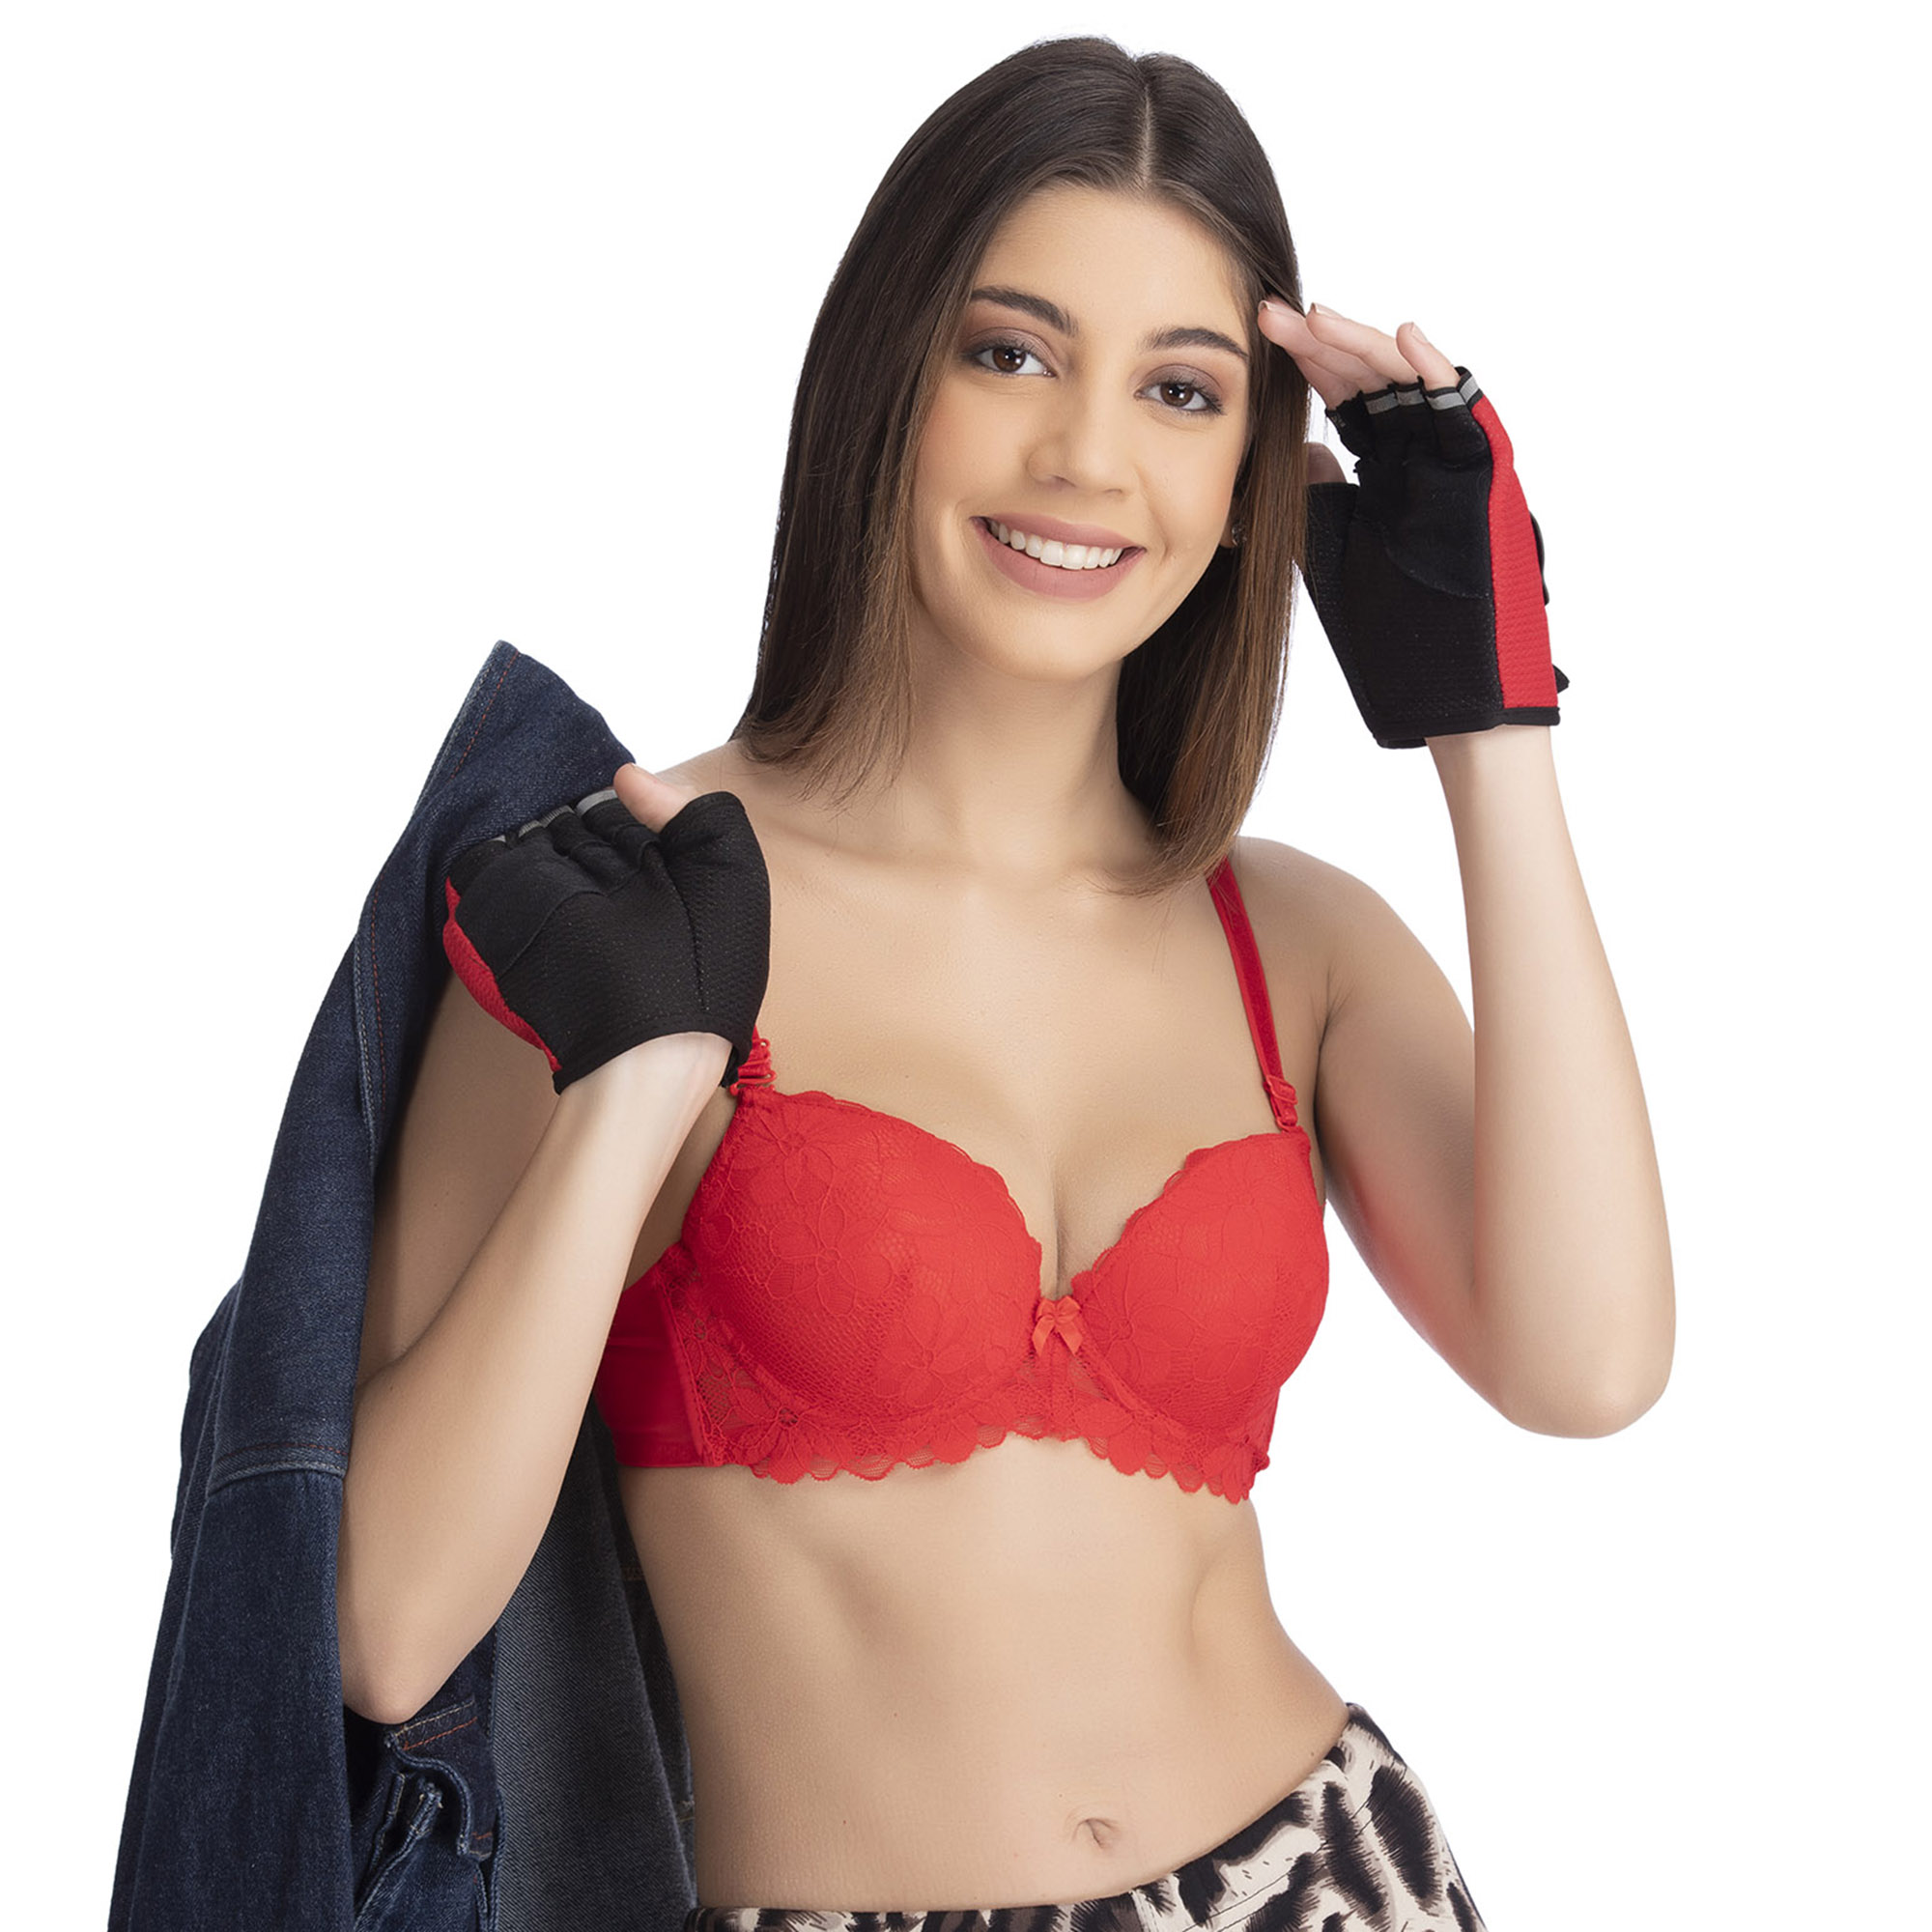 Wholesale bangladesh bra - Offering Lingerie For The Curvy Lady